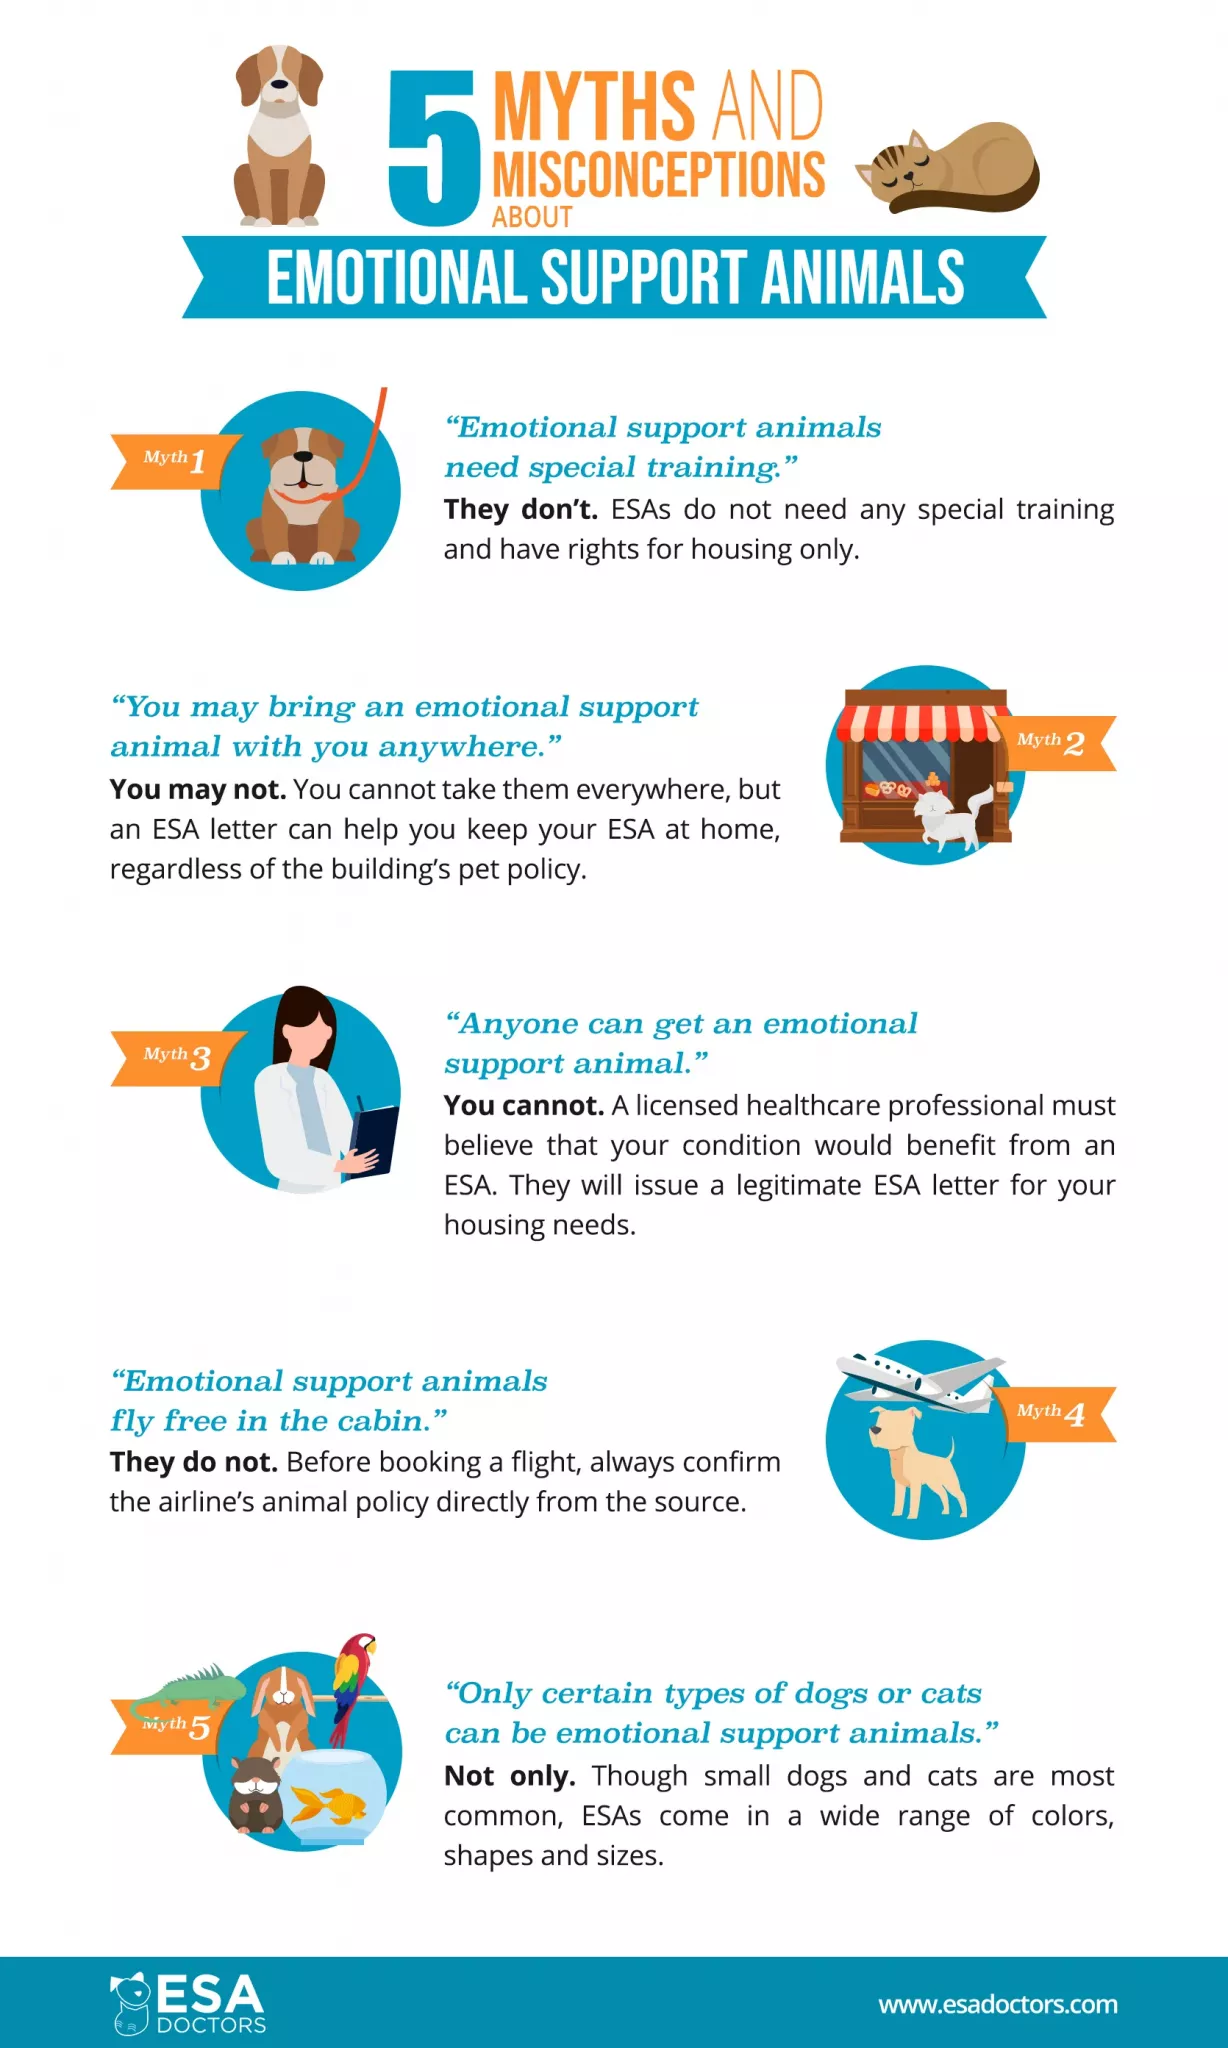 5 Myths and Misconceptions About Emotional Support Animals - ESA Doctors